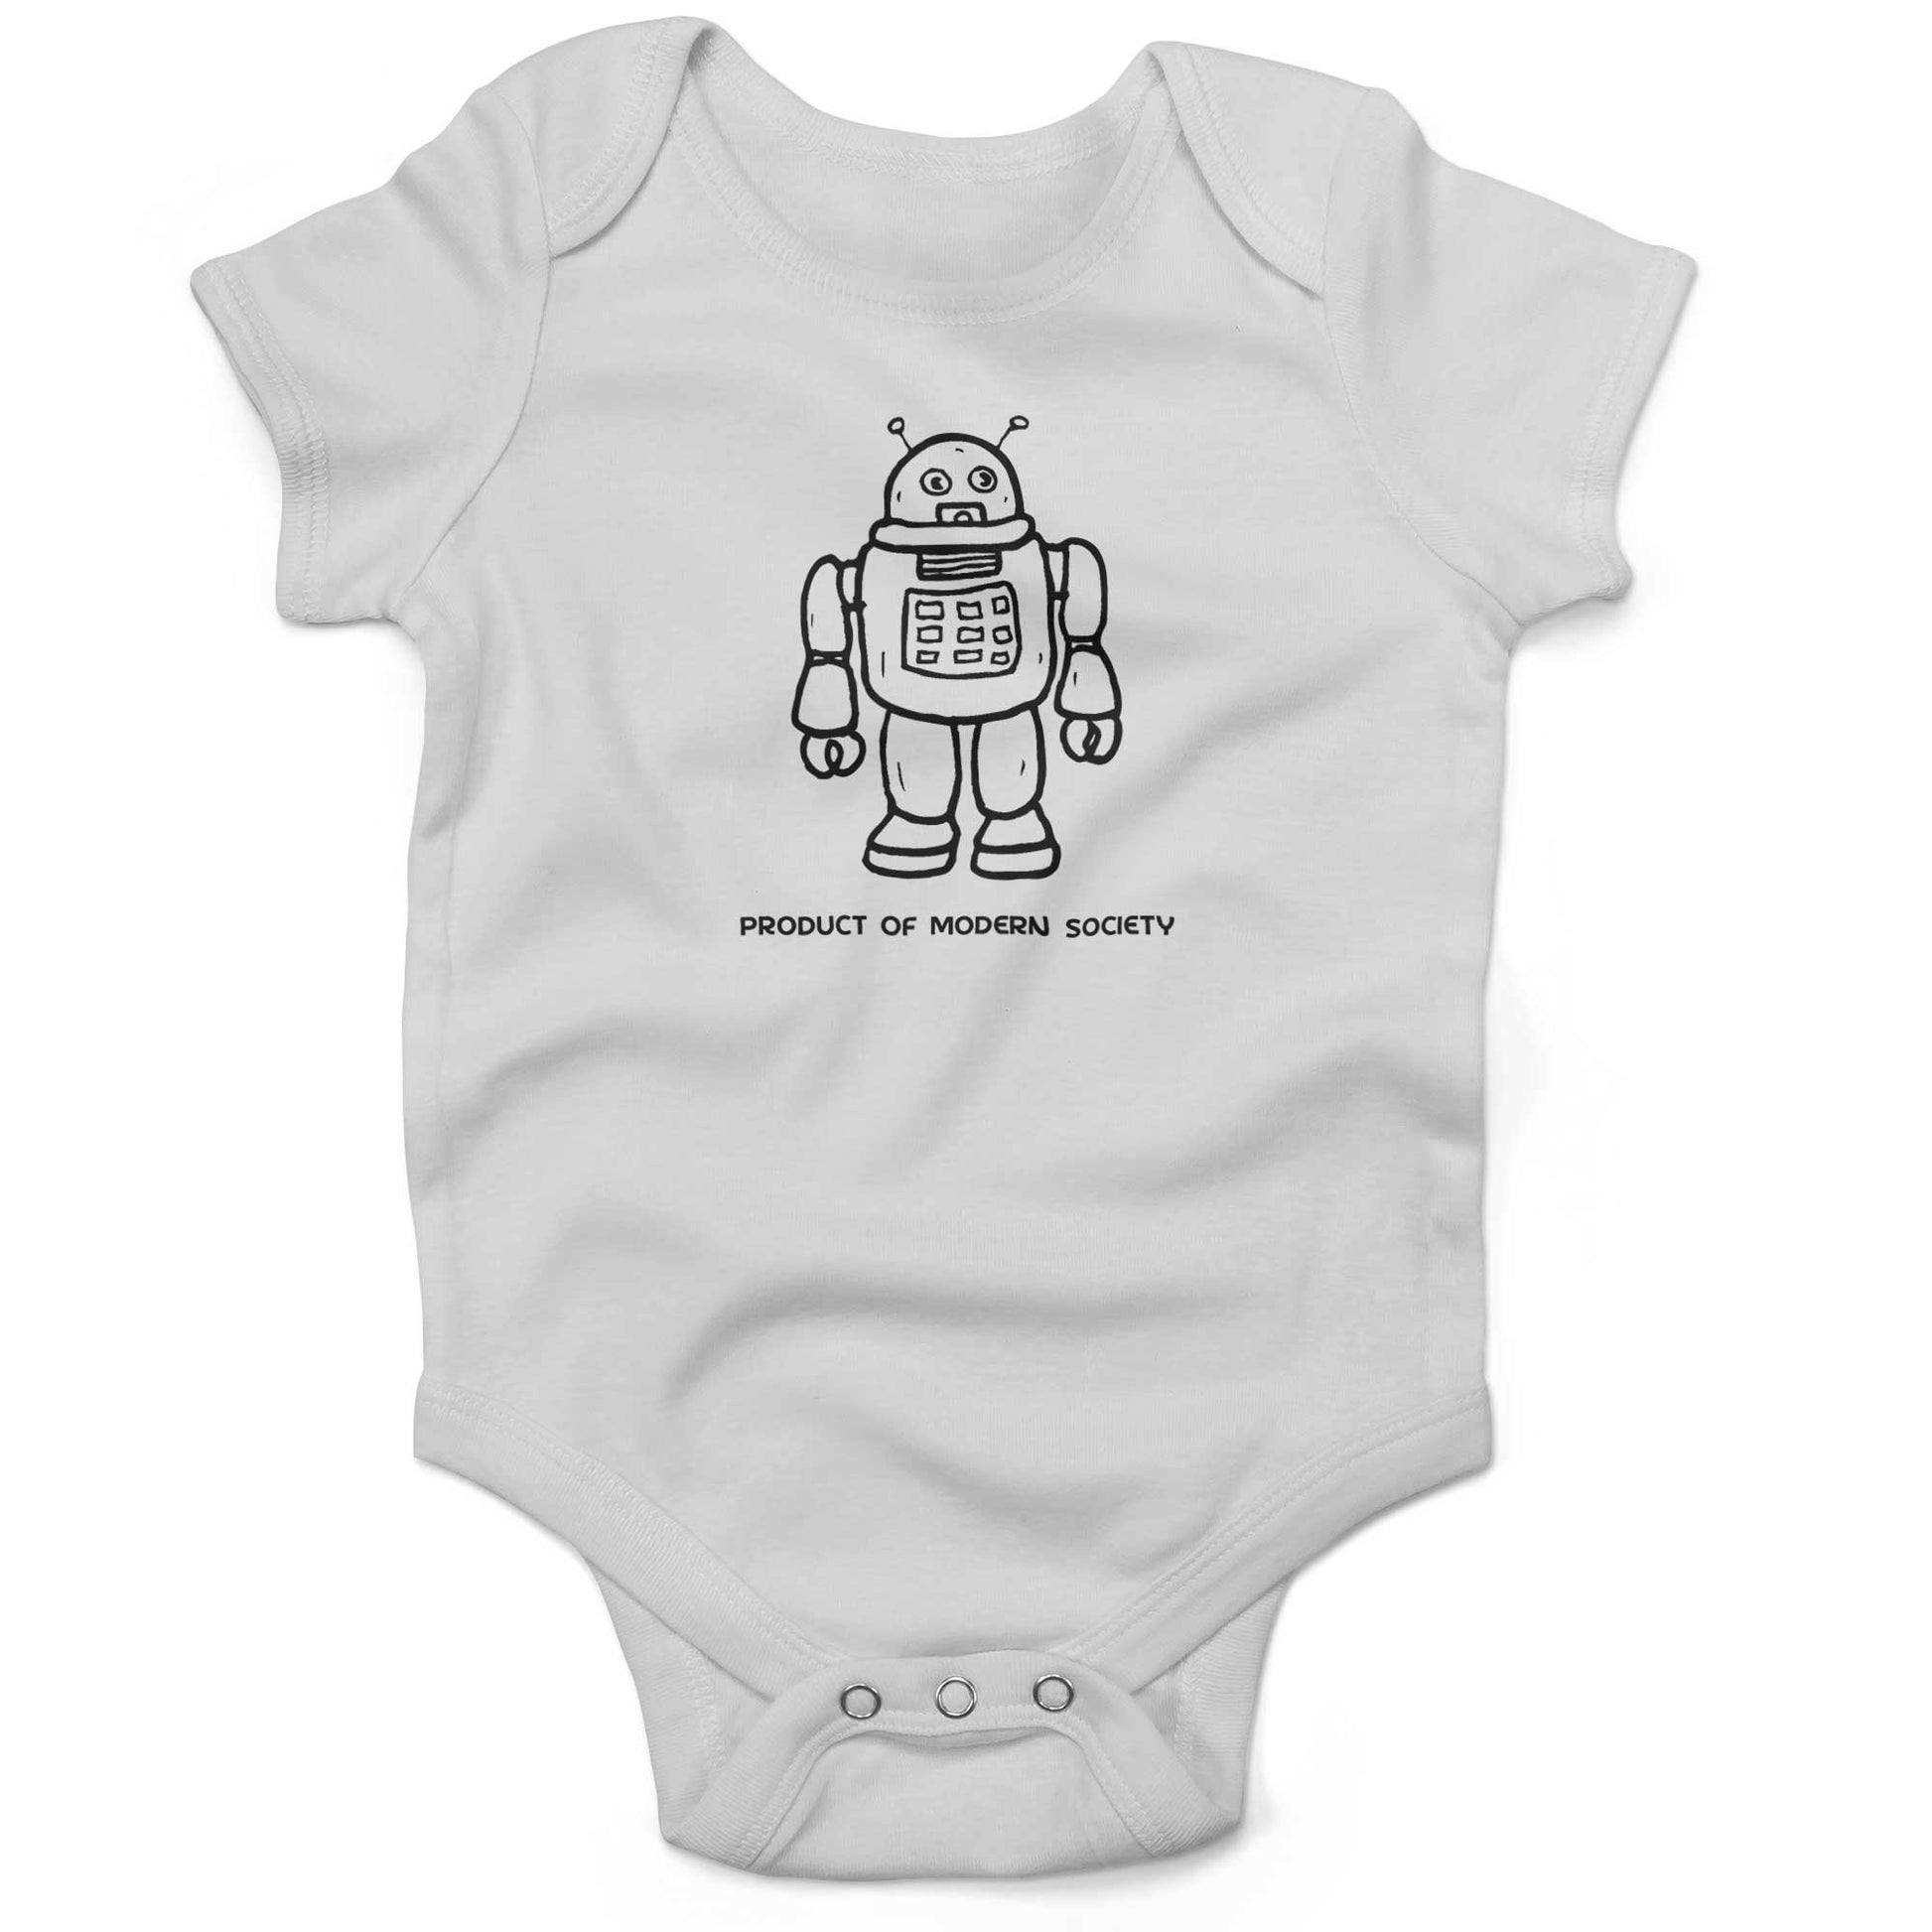 Product Of Modern Society Infant Bodysuit-White-3-6 months